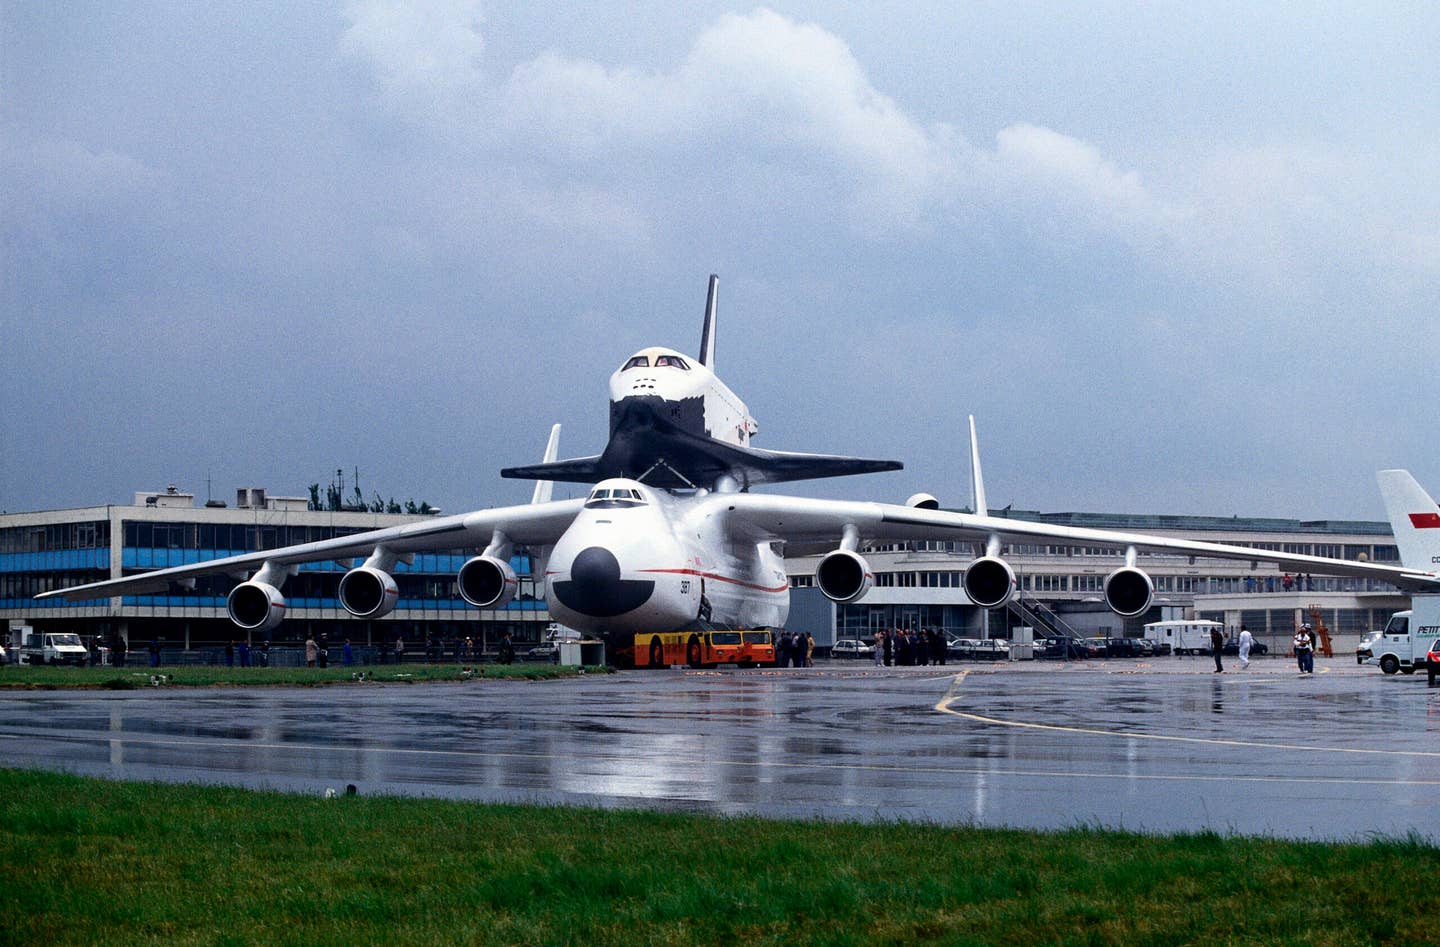 The An-225 Mriya is towed by an airport at the 1989 Paris Air Show with the Soviet Buran space shuttle on its back. <em>Photo by: aviation-images.com/Universal Images Group via Getty Images</em>